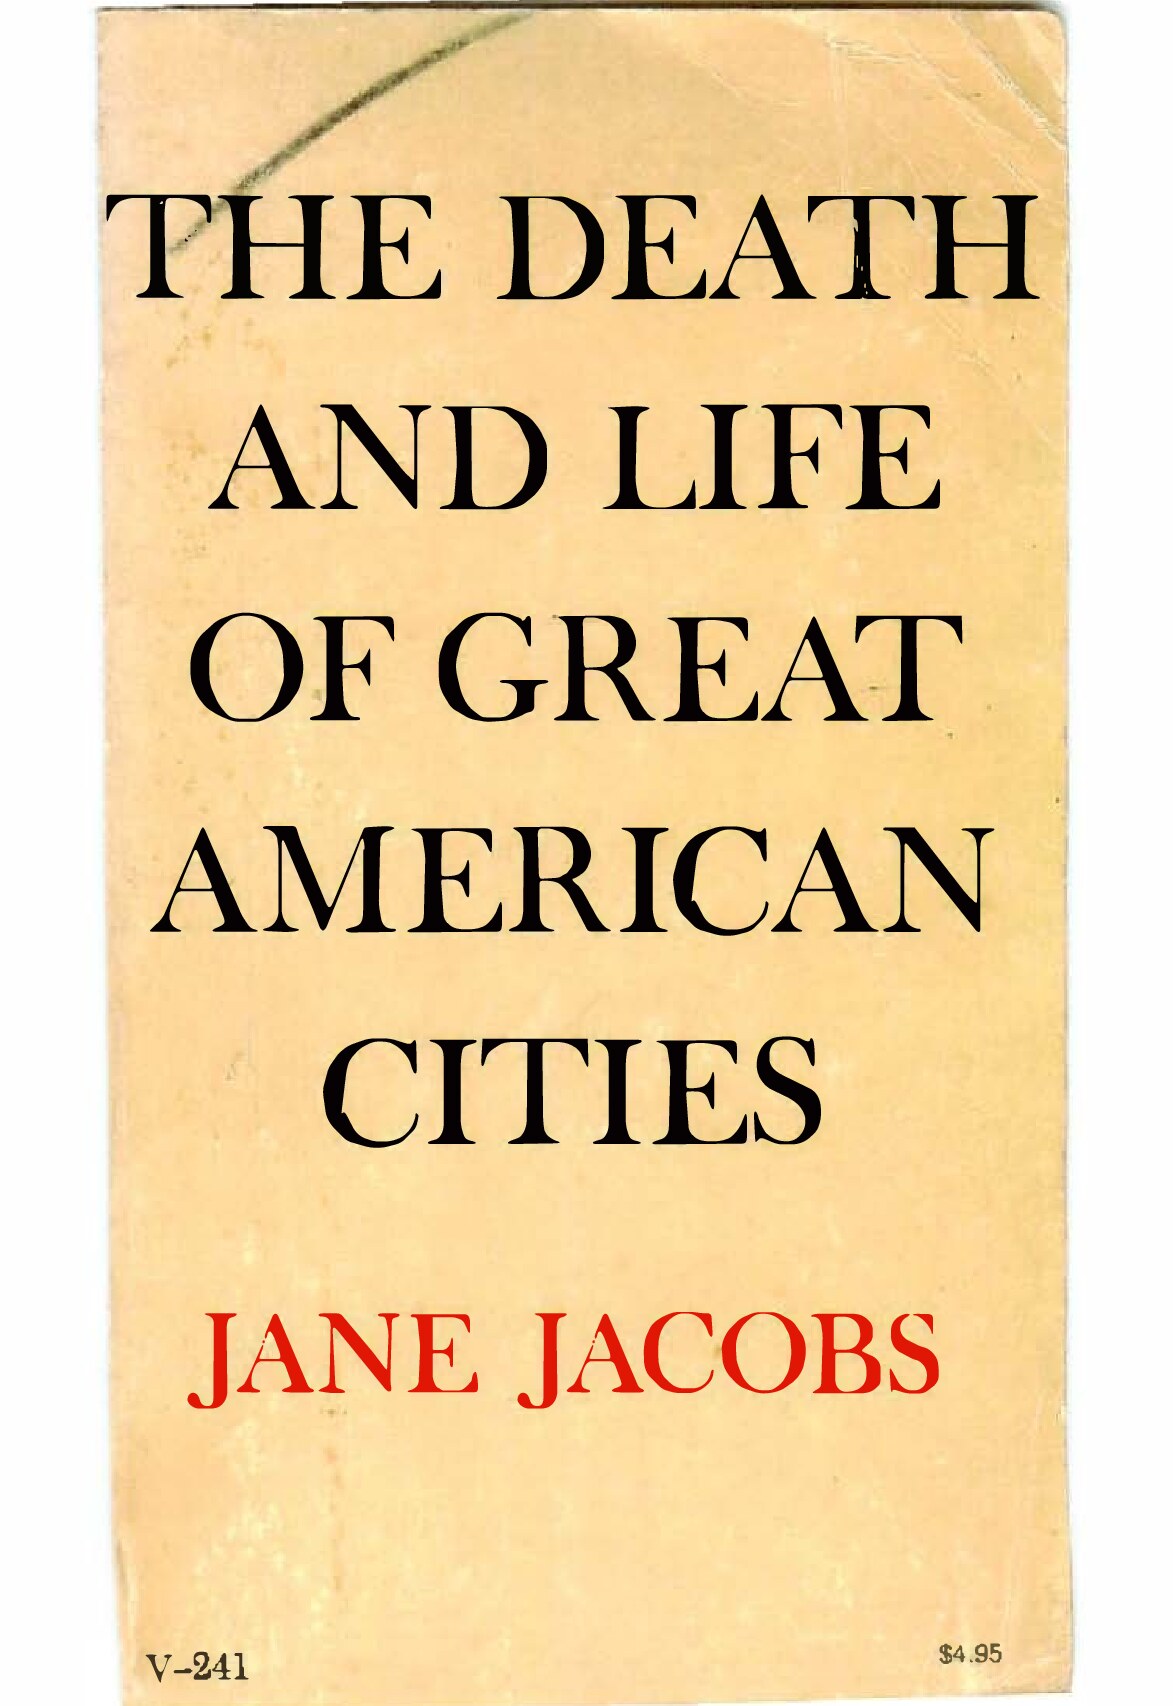 Jane Jacobs-The Death and Life of Great American Cities